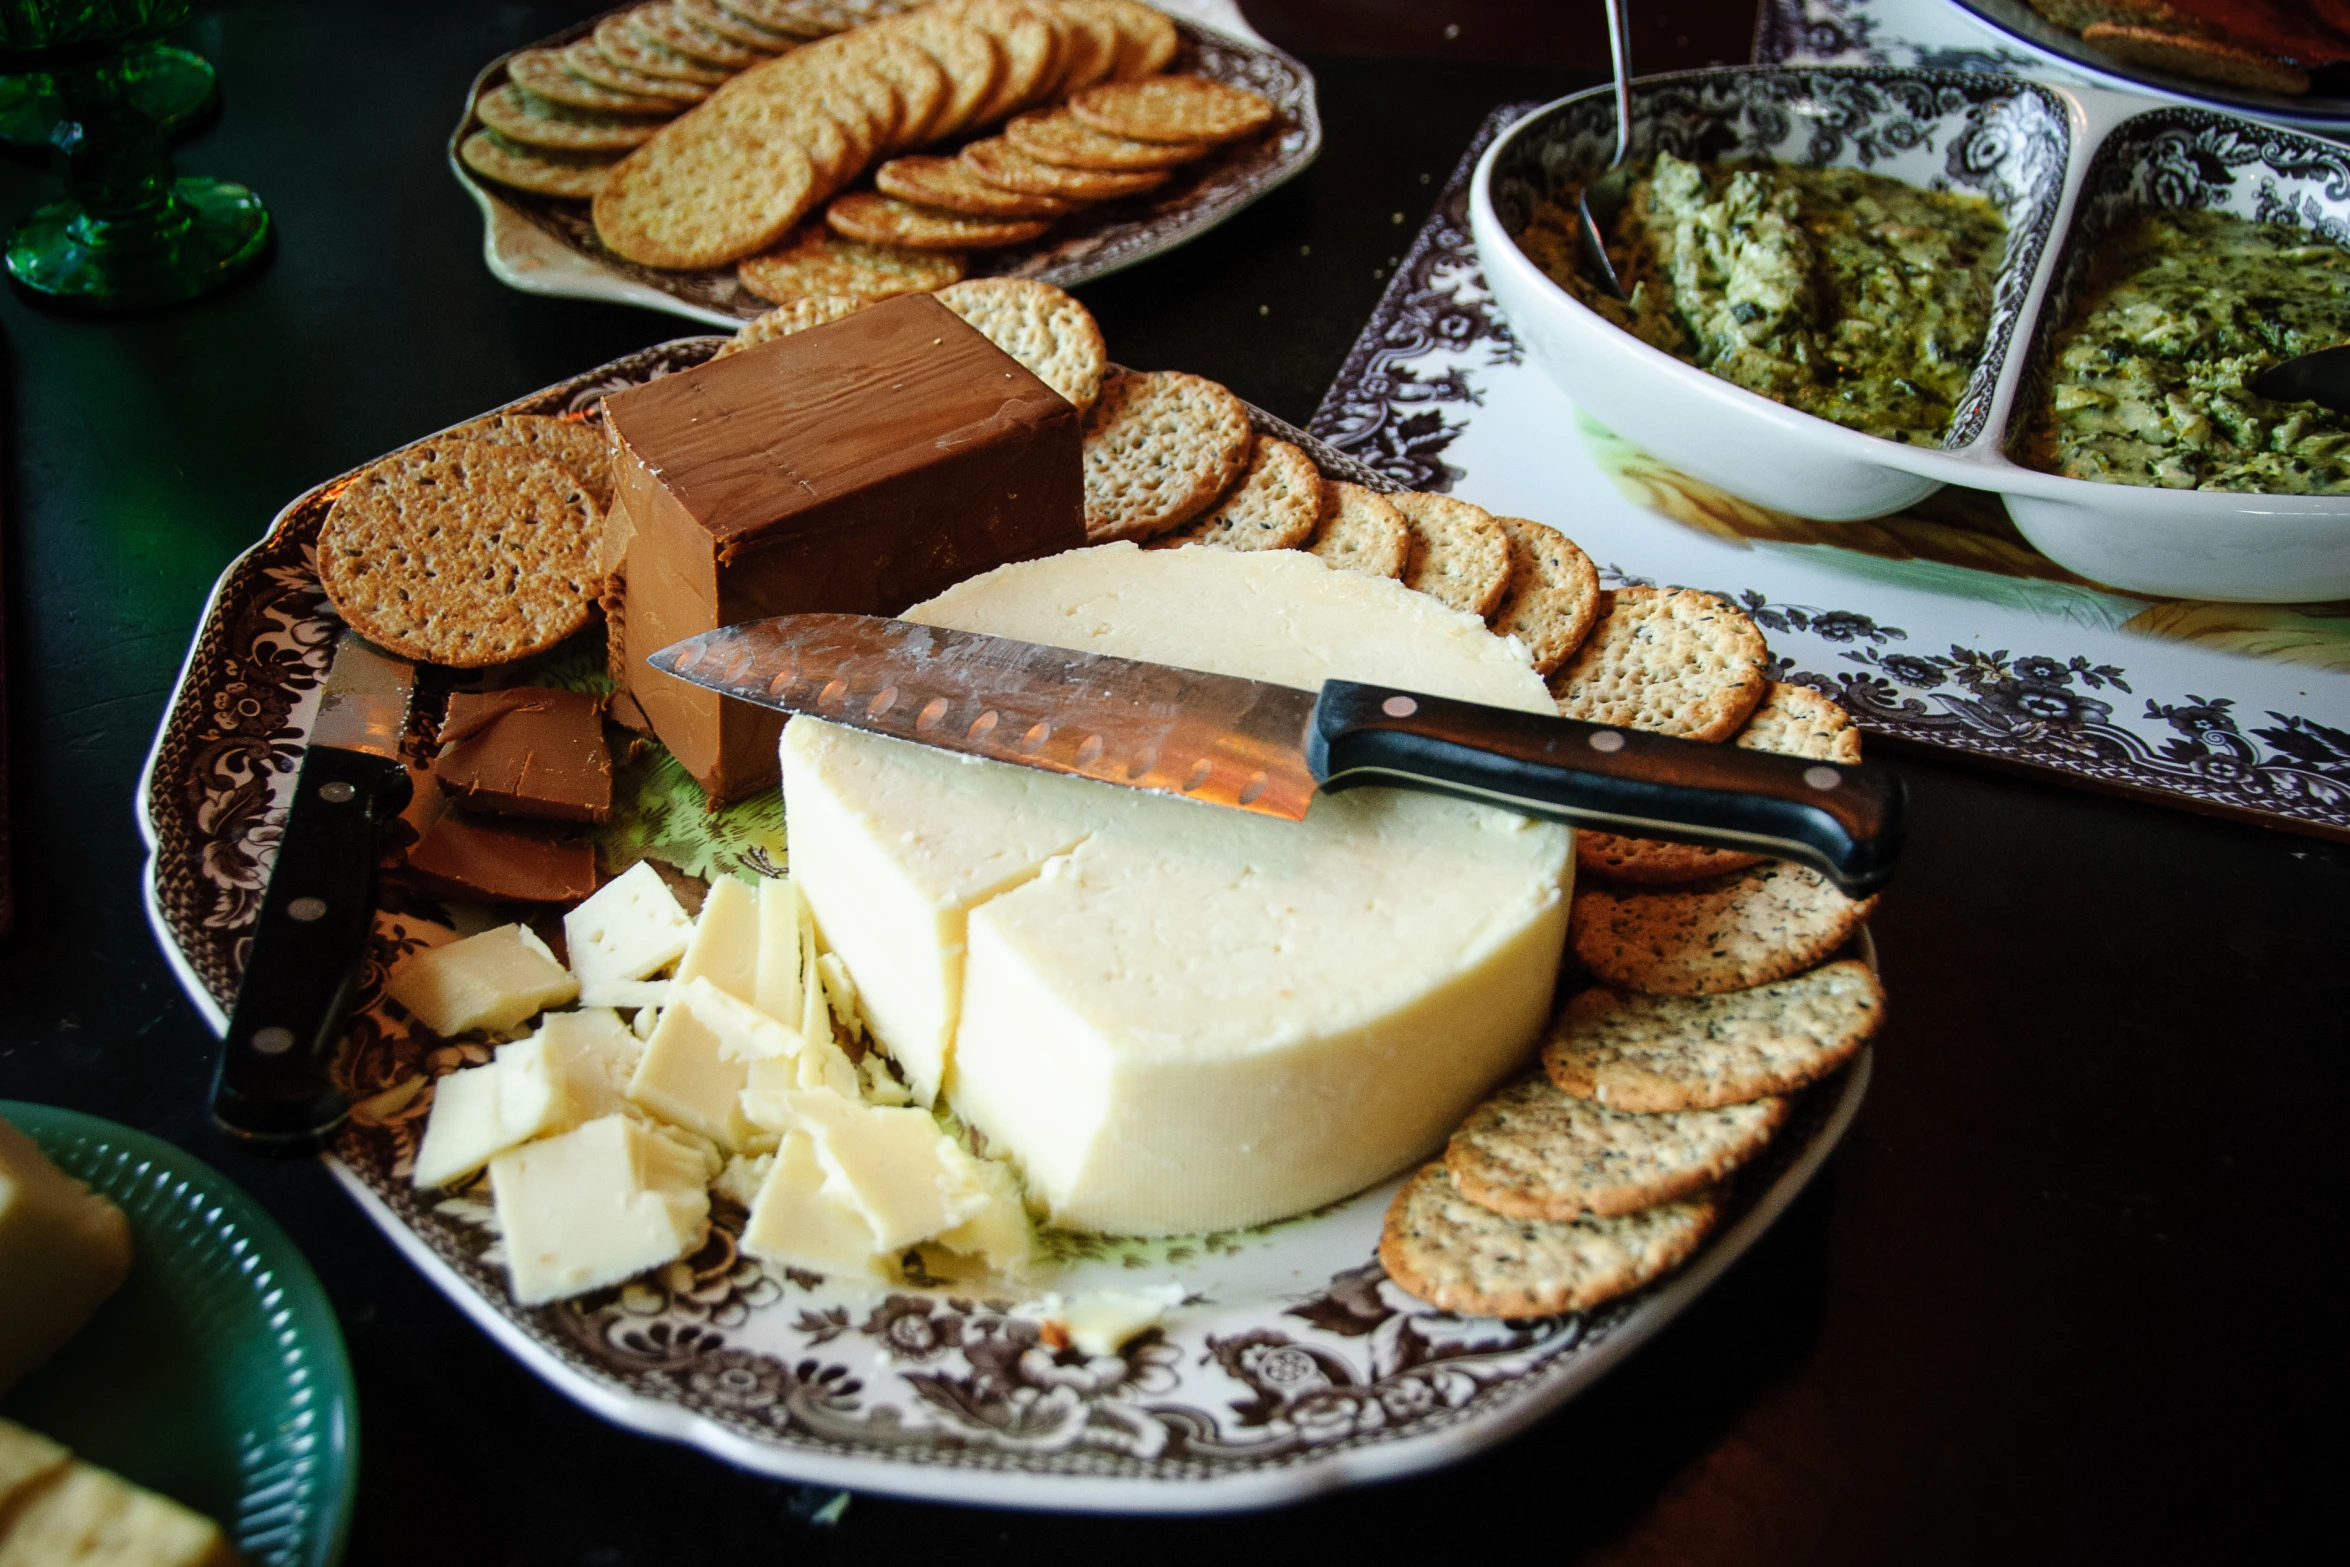 a cheese platter full of ers and cheese